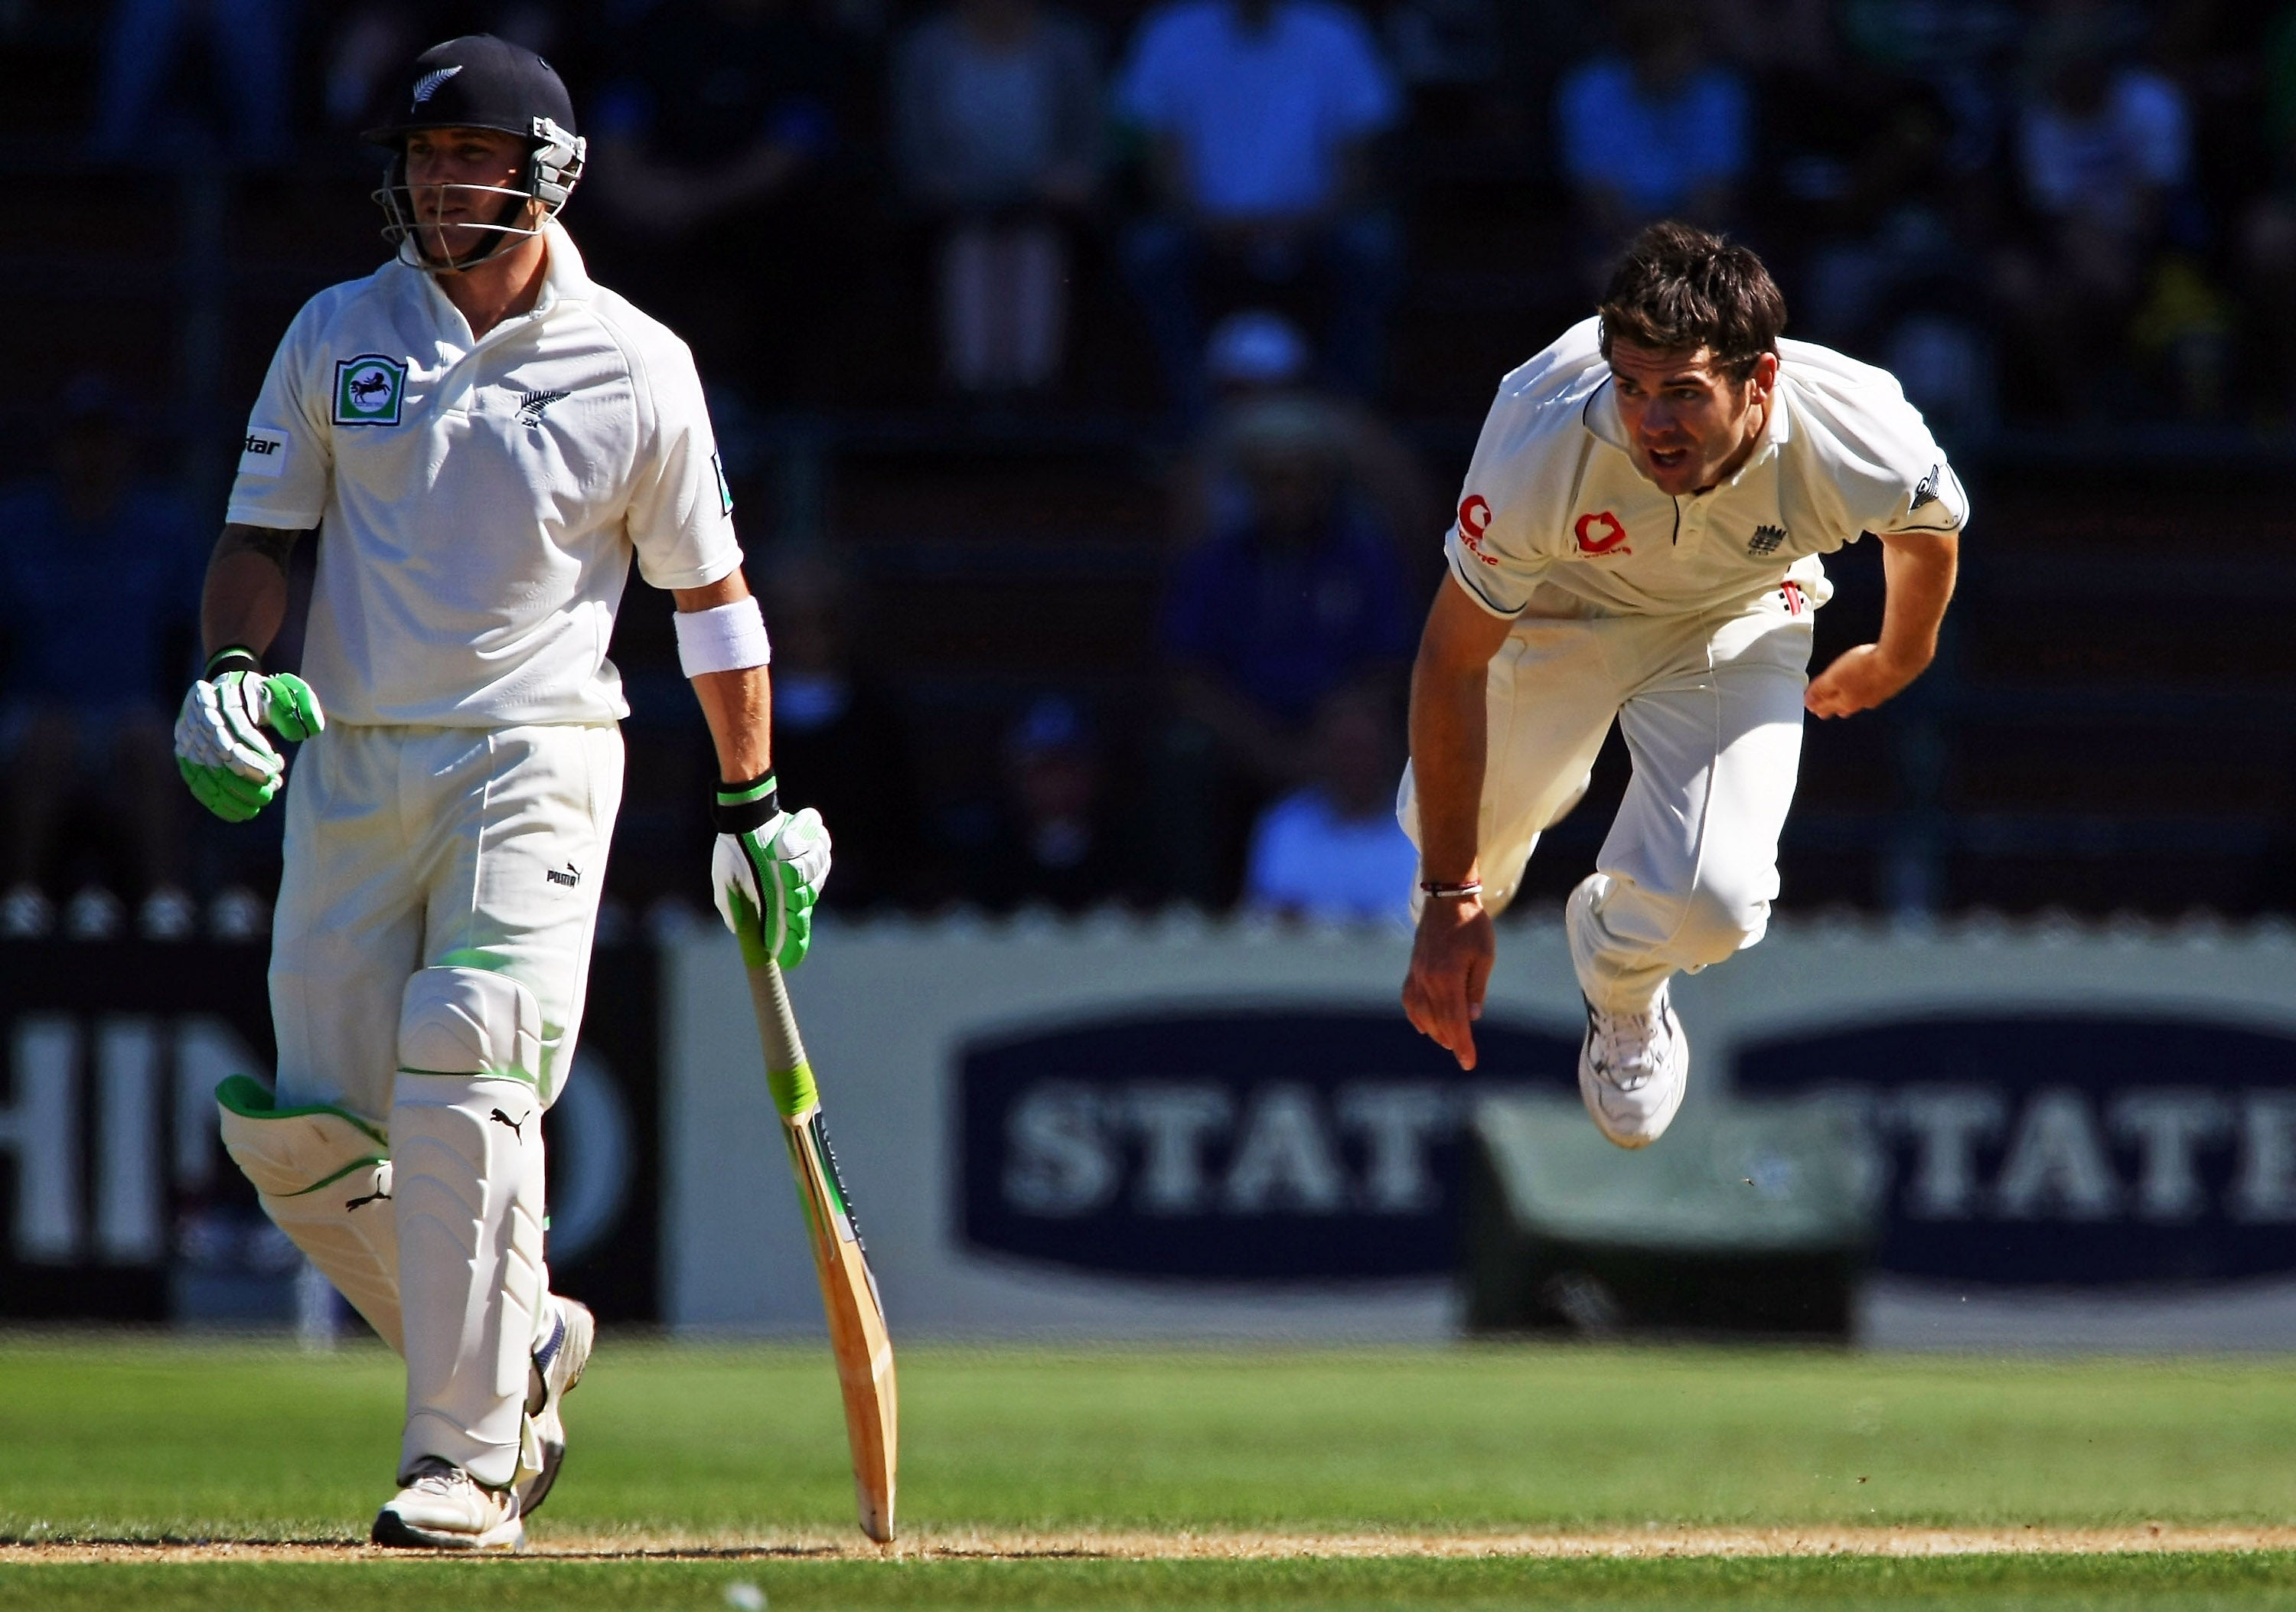 James Anderson in action in March 2008 as Brendon McCullum looks on